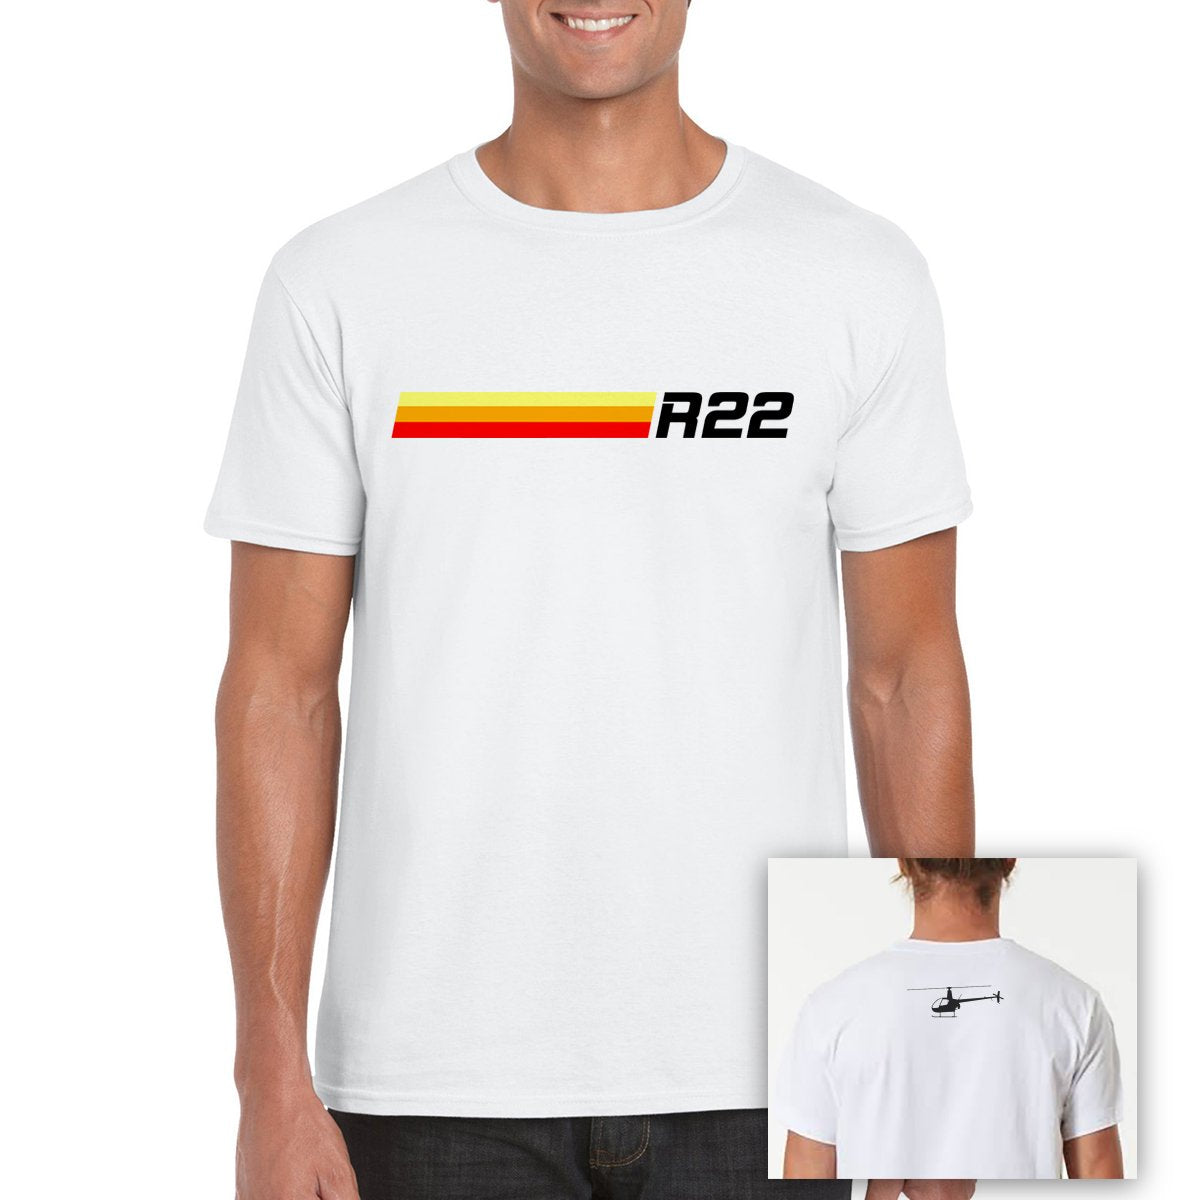 Robinson R22 Helicopter T-Shirt